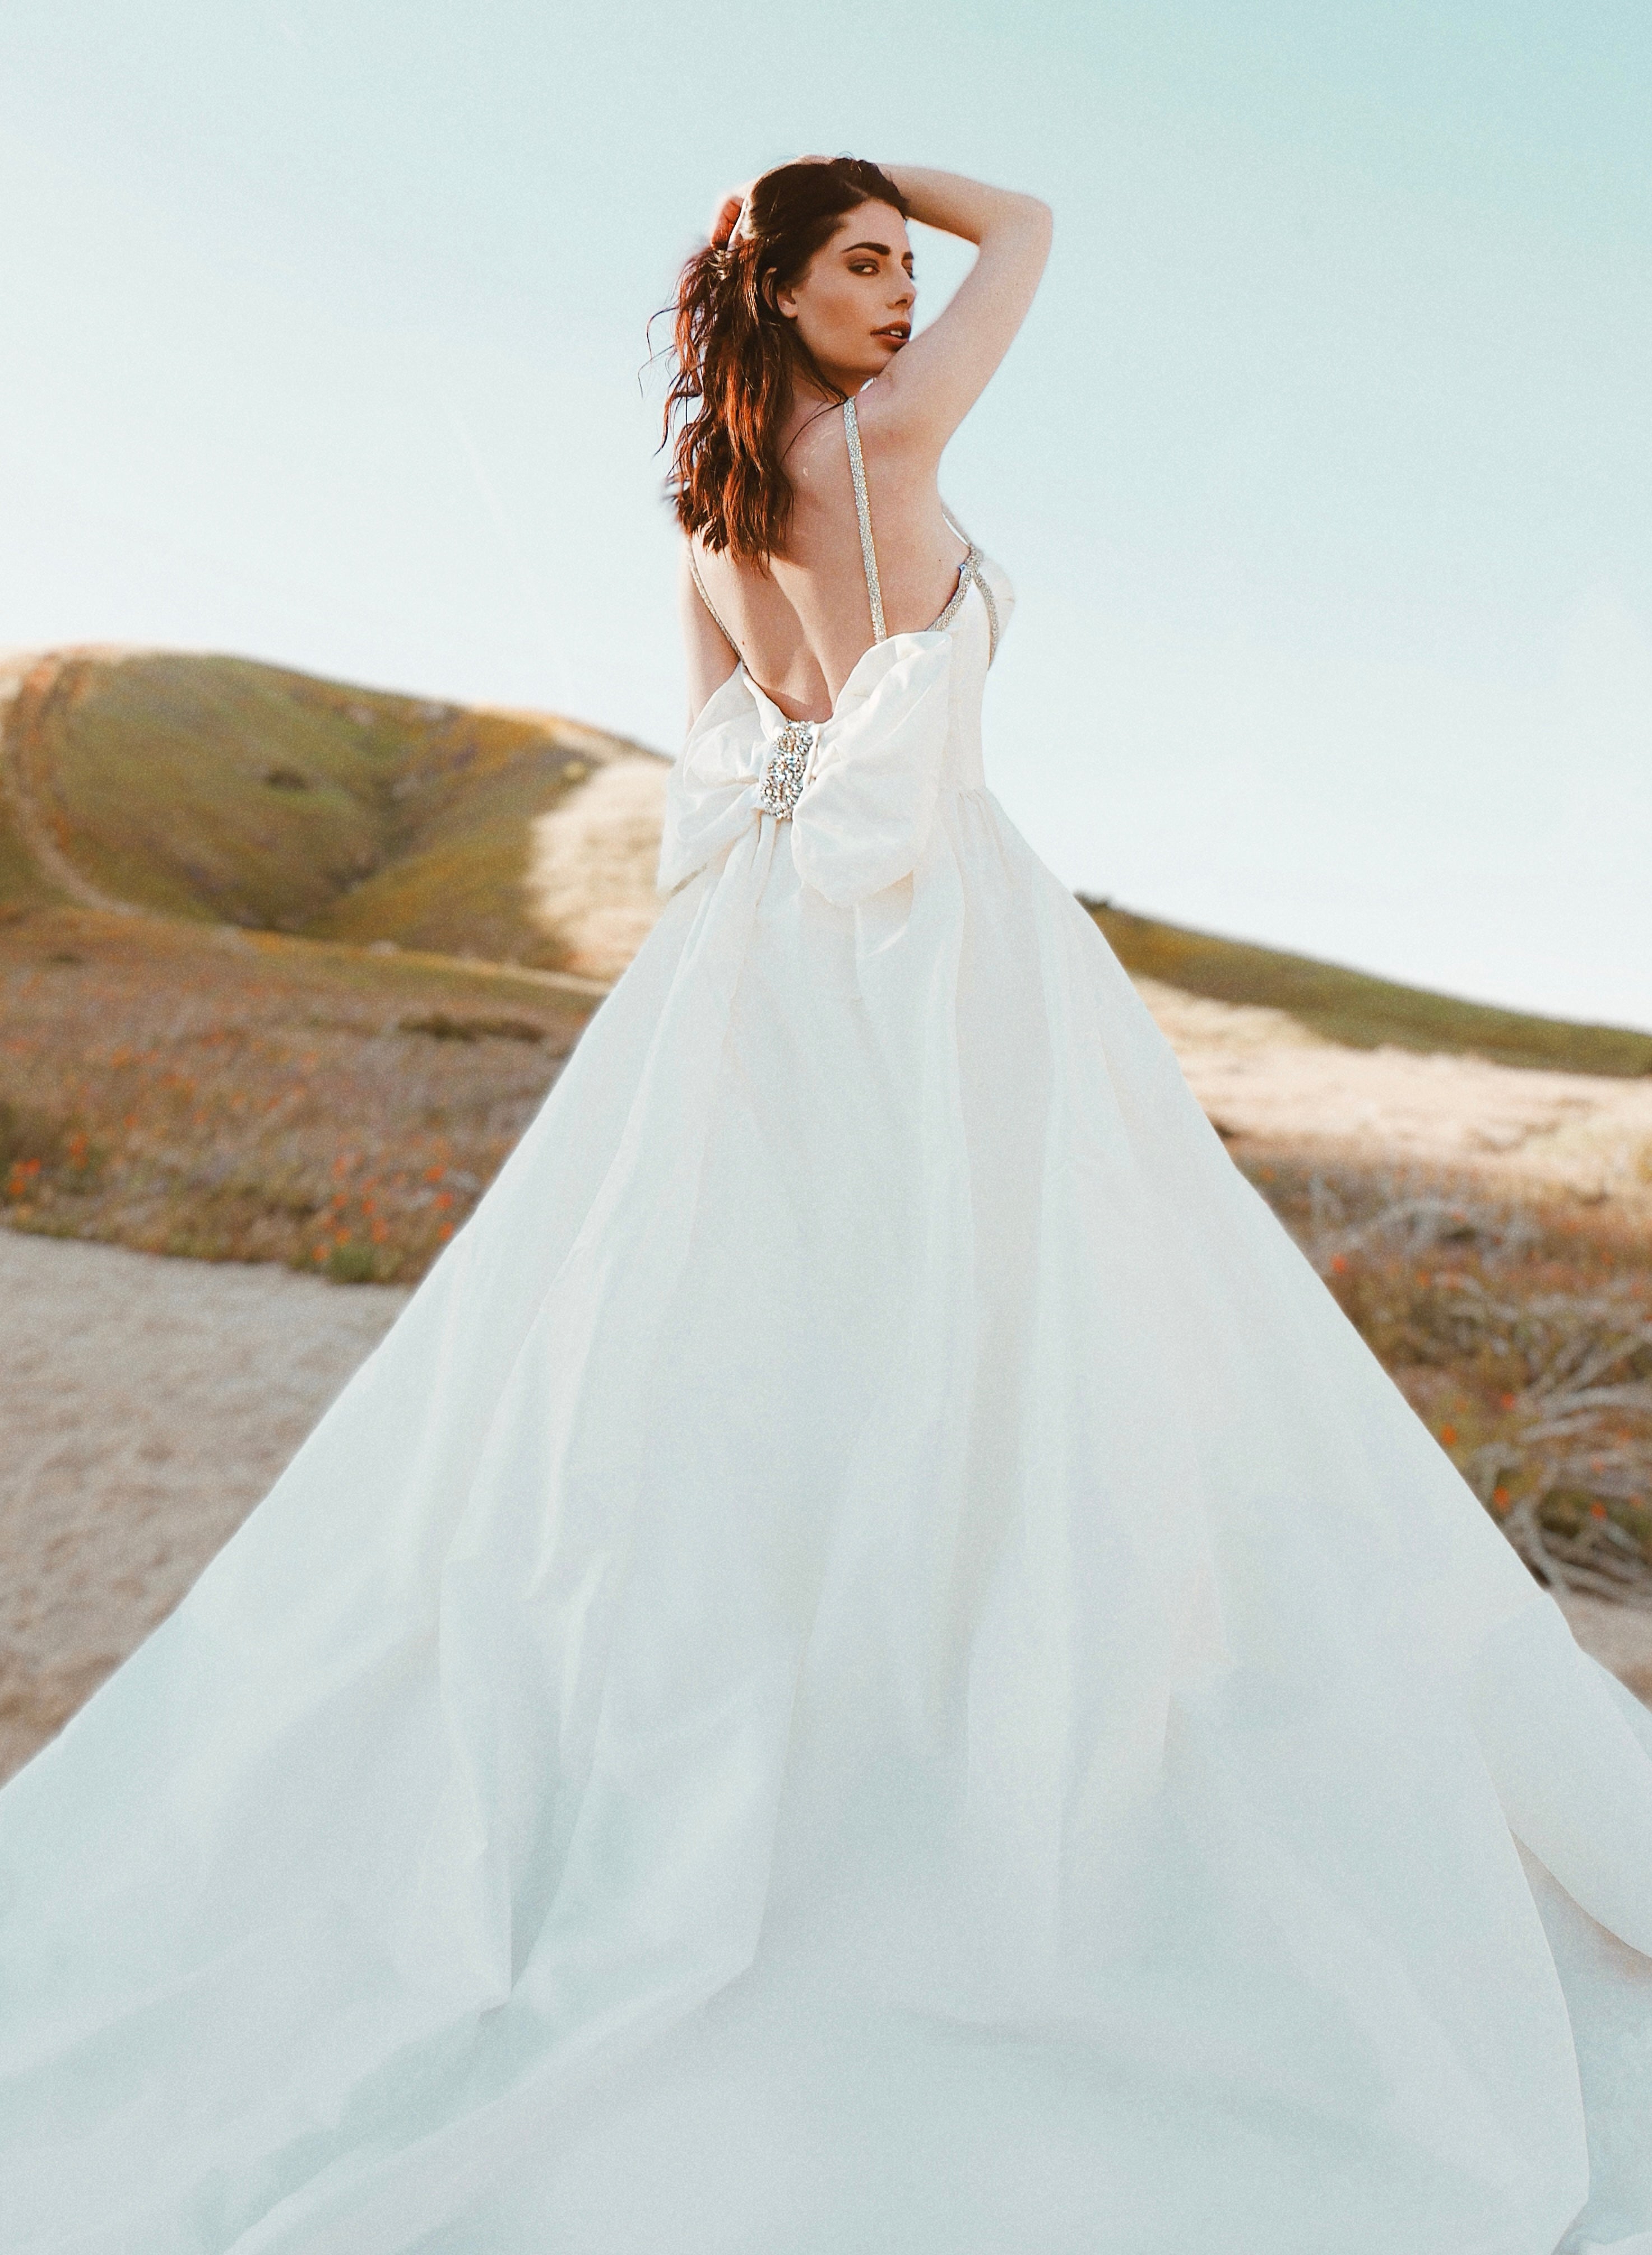 Wedding gowns with detachable bows by Lauren Elaine Bridal  Los Angeles